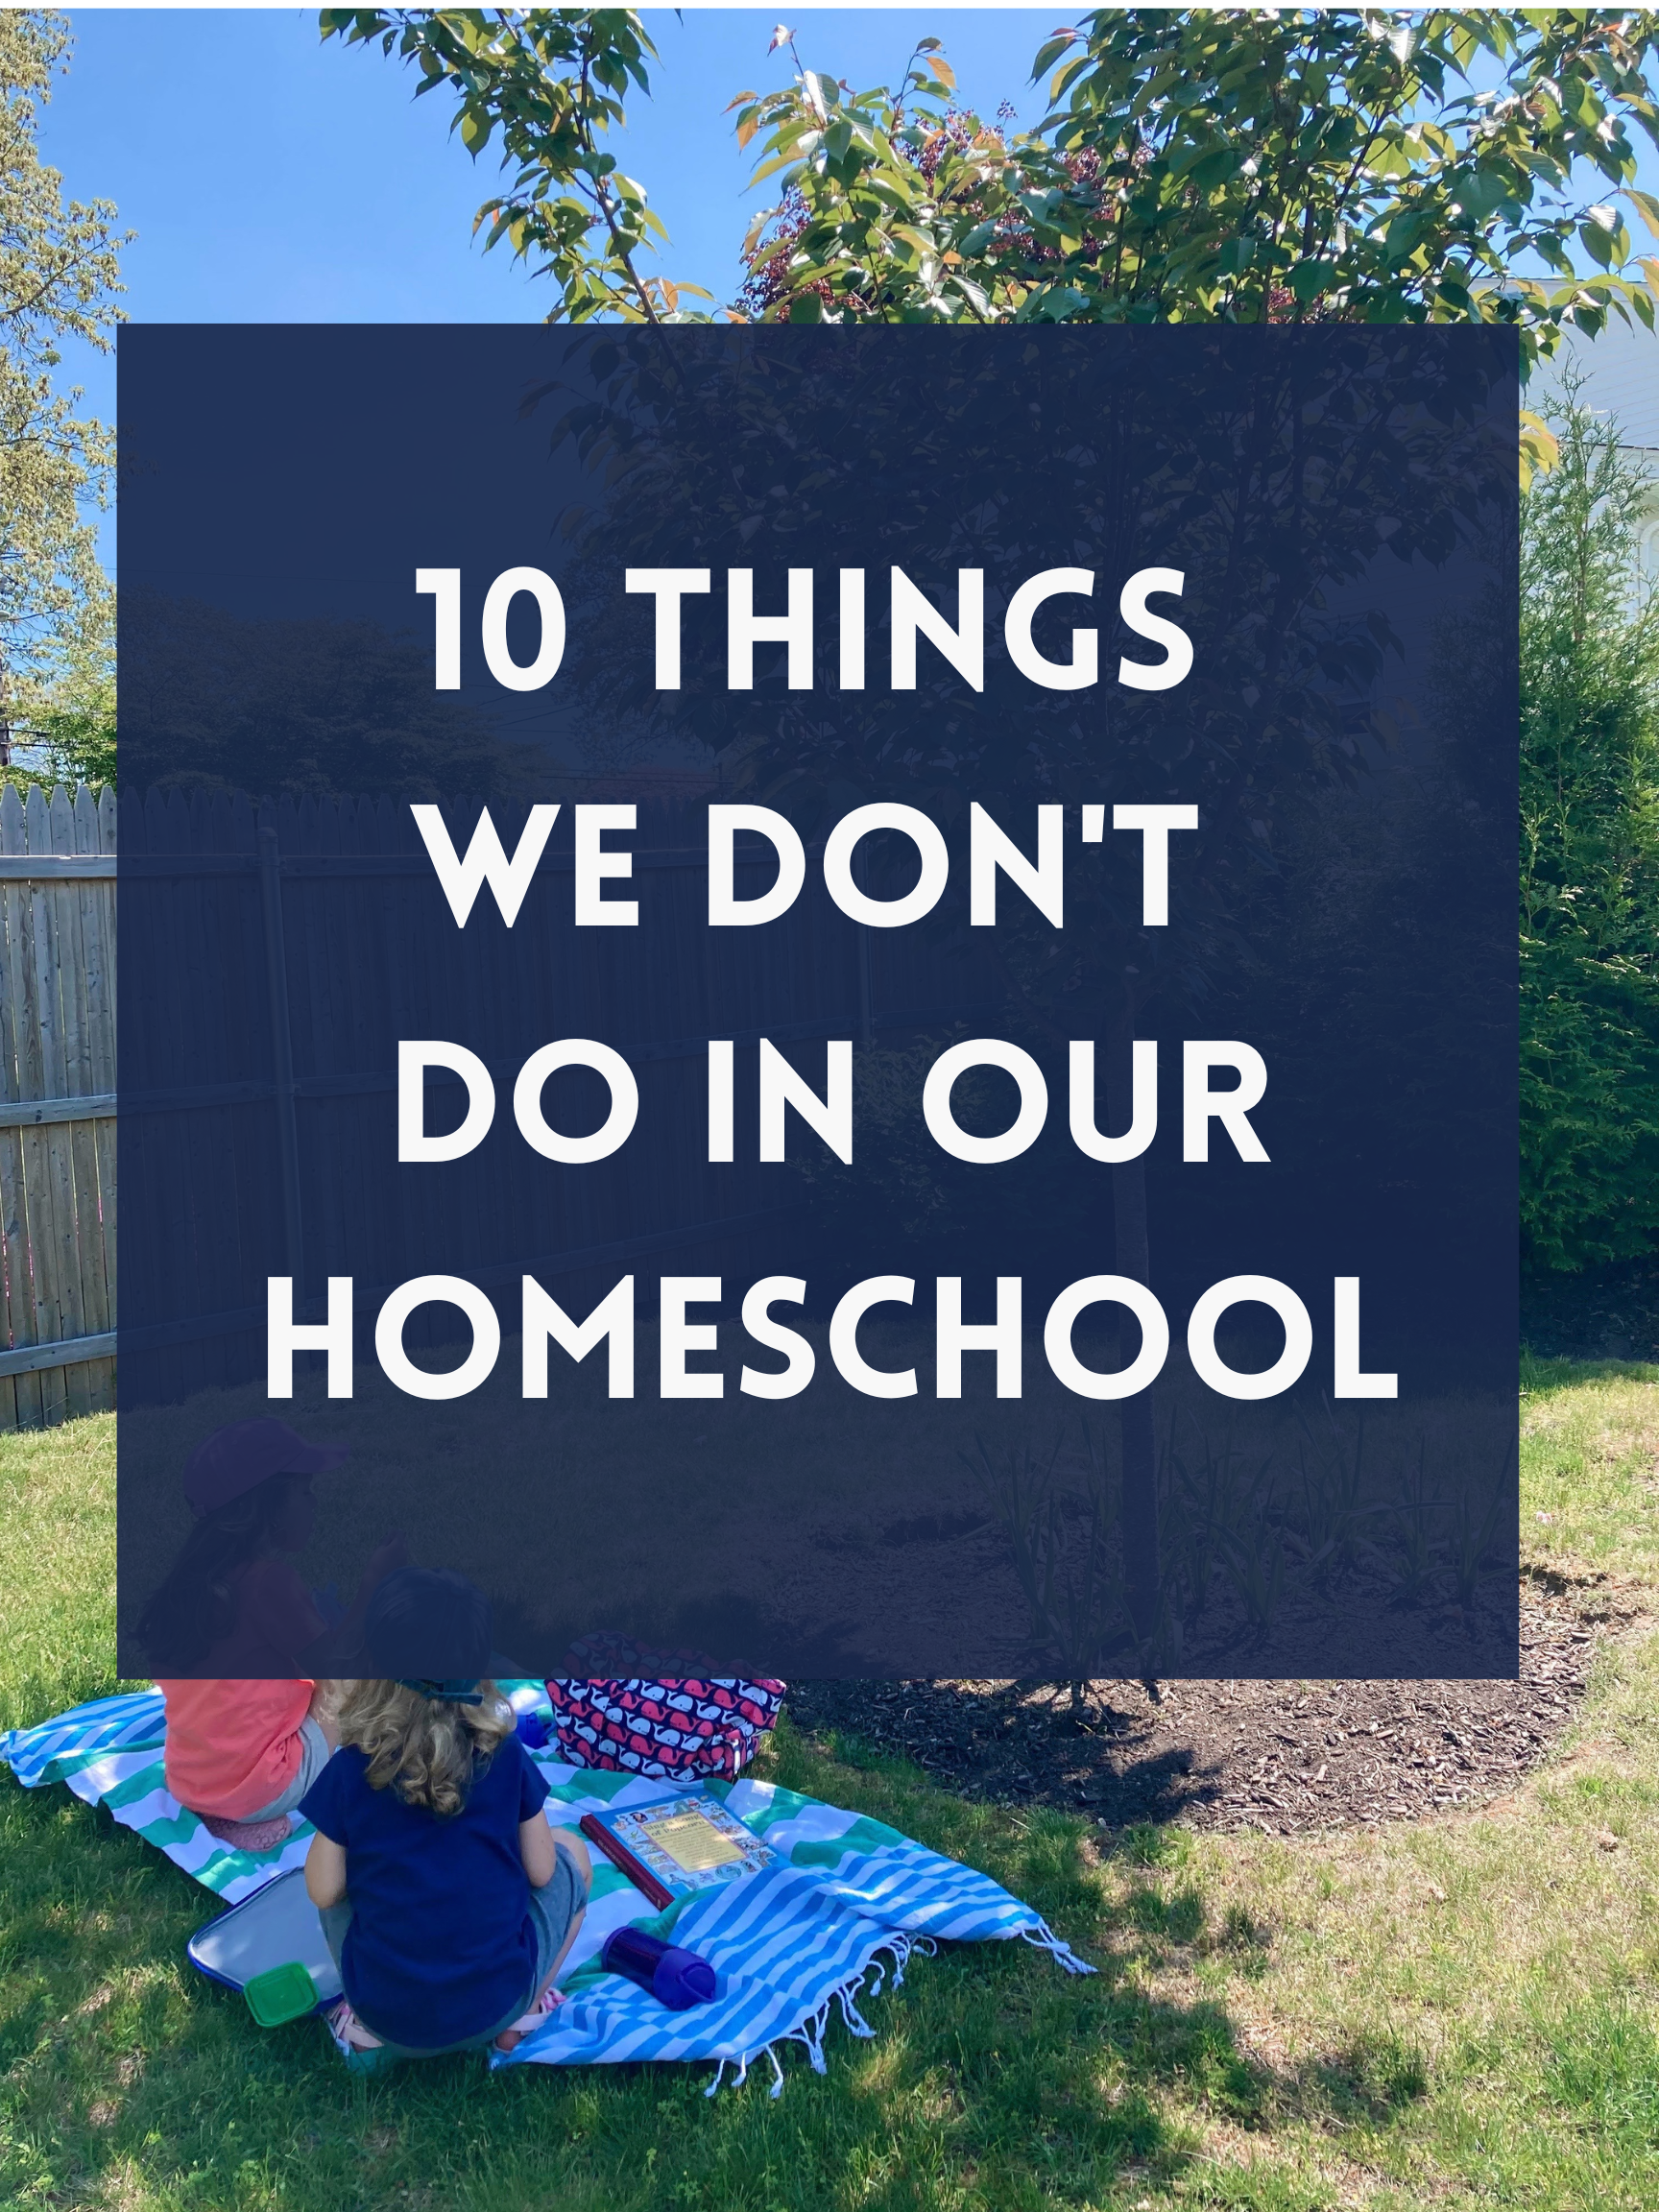 10 Things We Don't Do in Our Homeschool